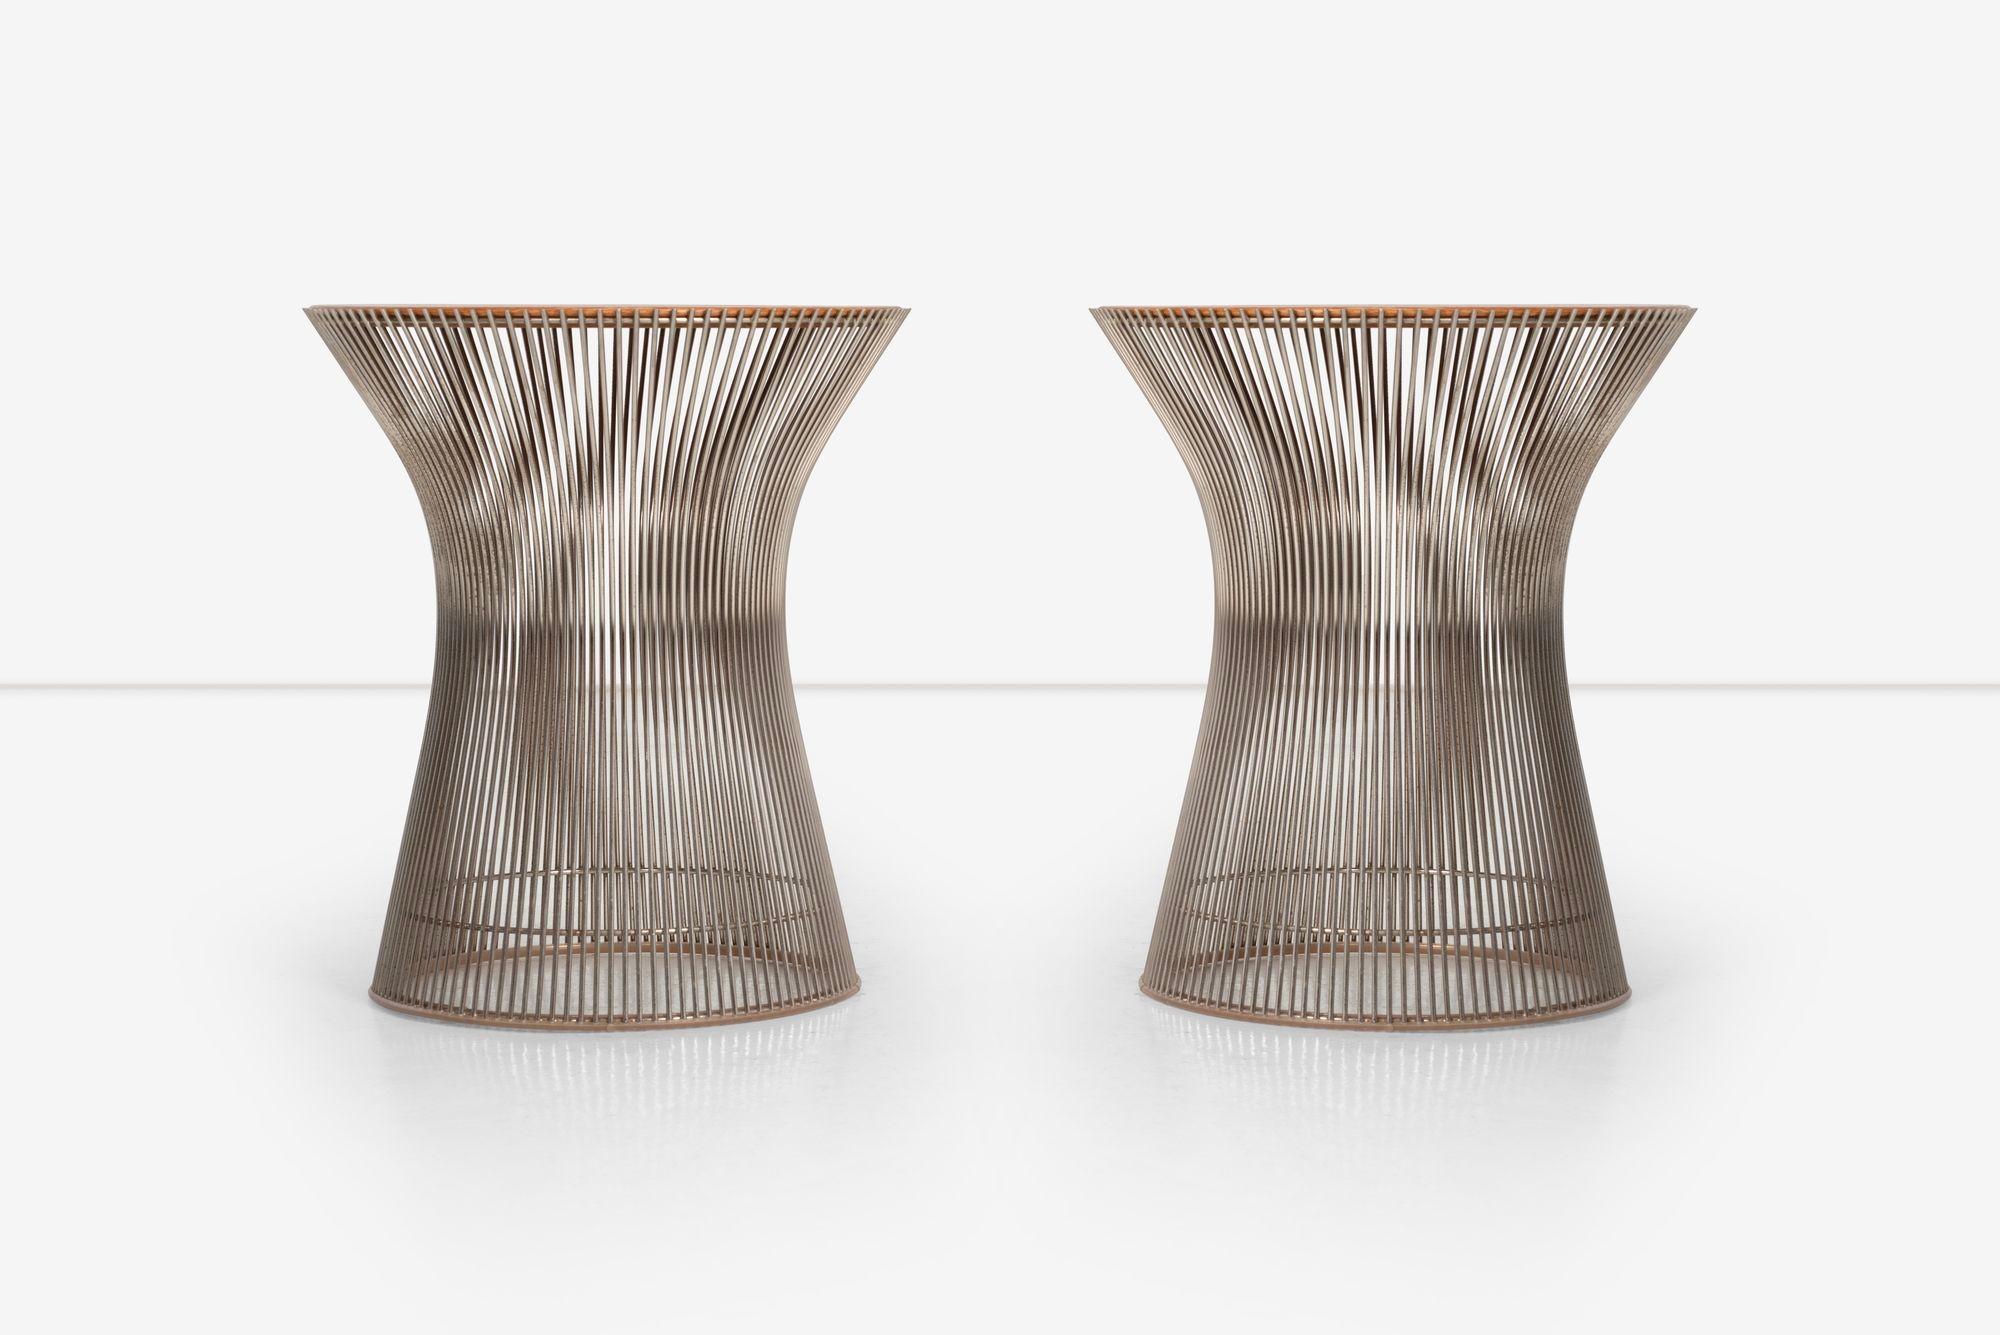 Pair of Warren Platner Side Tables, welded curved nickel plated steel rods to circular frames, simultaneously serving as structure and ornament with inset oak tops.